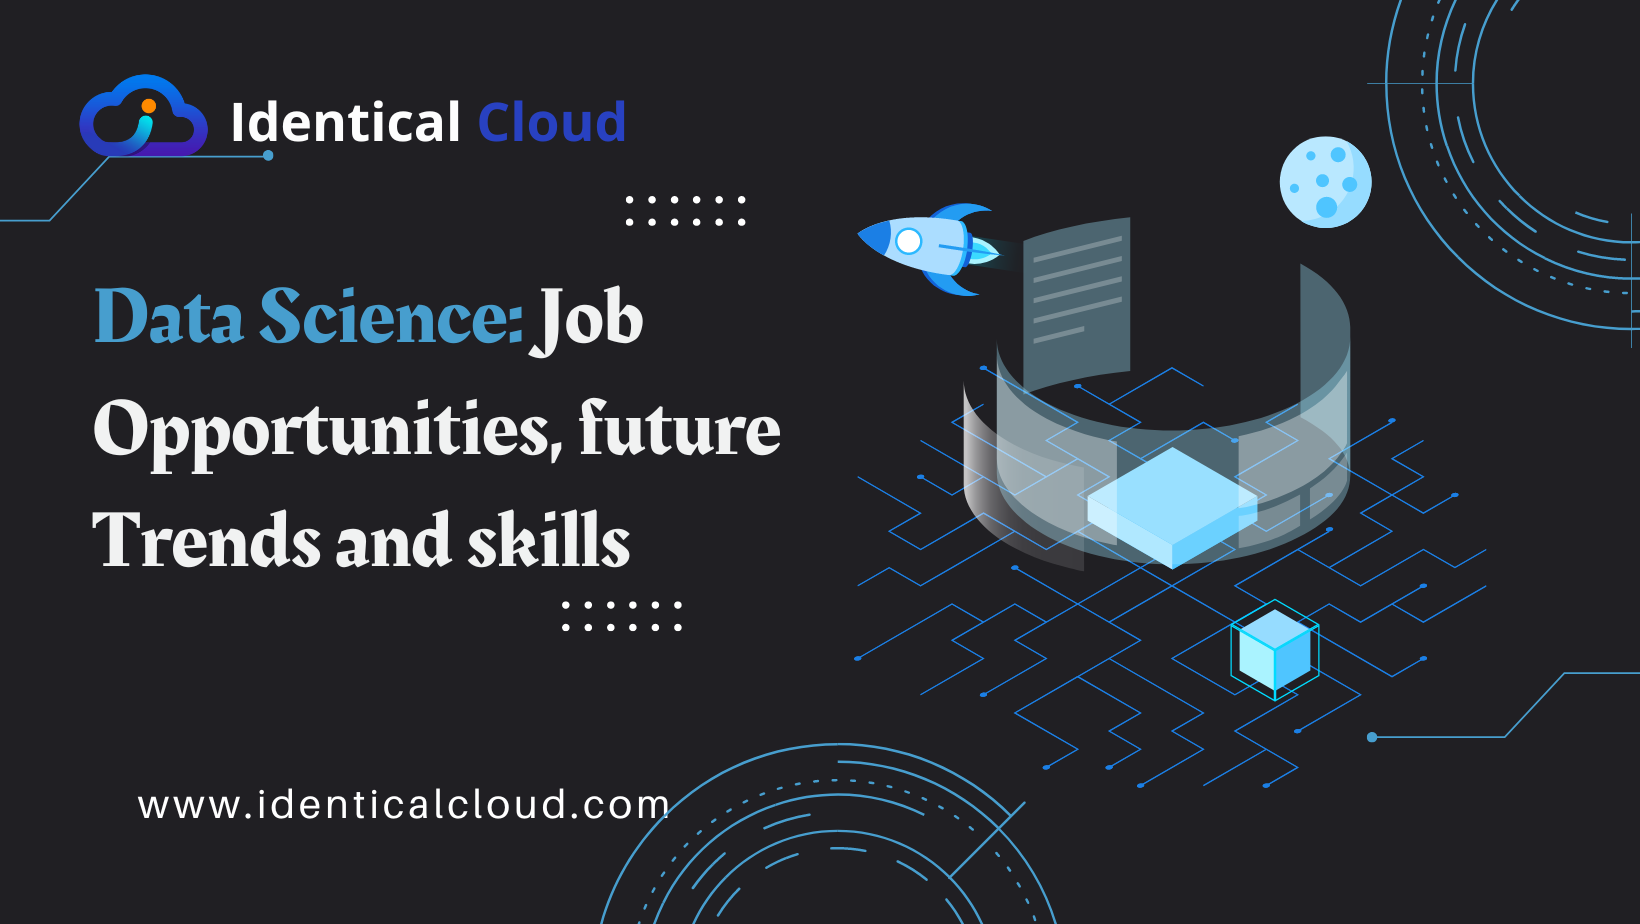 Data Science: Job Opportunities, future Trends and skills - identicalcloud.com